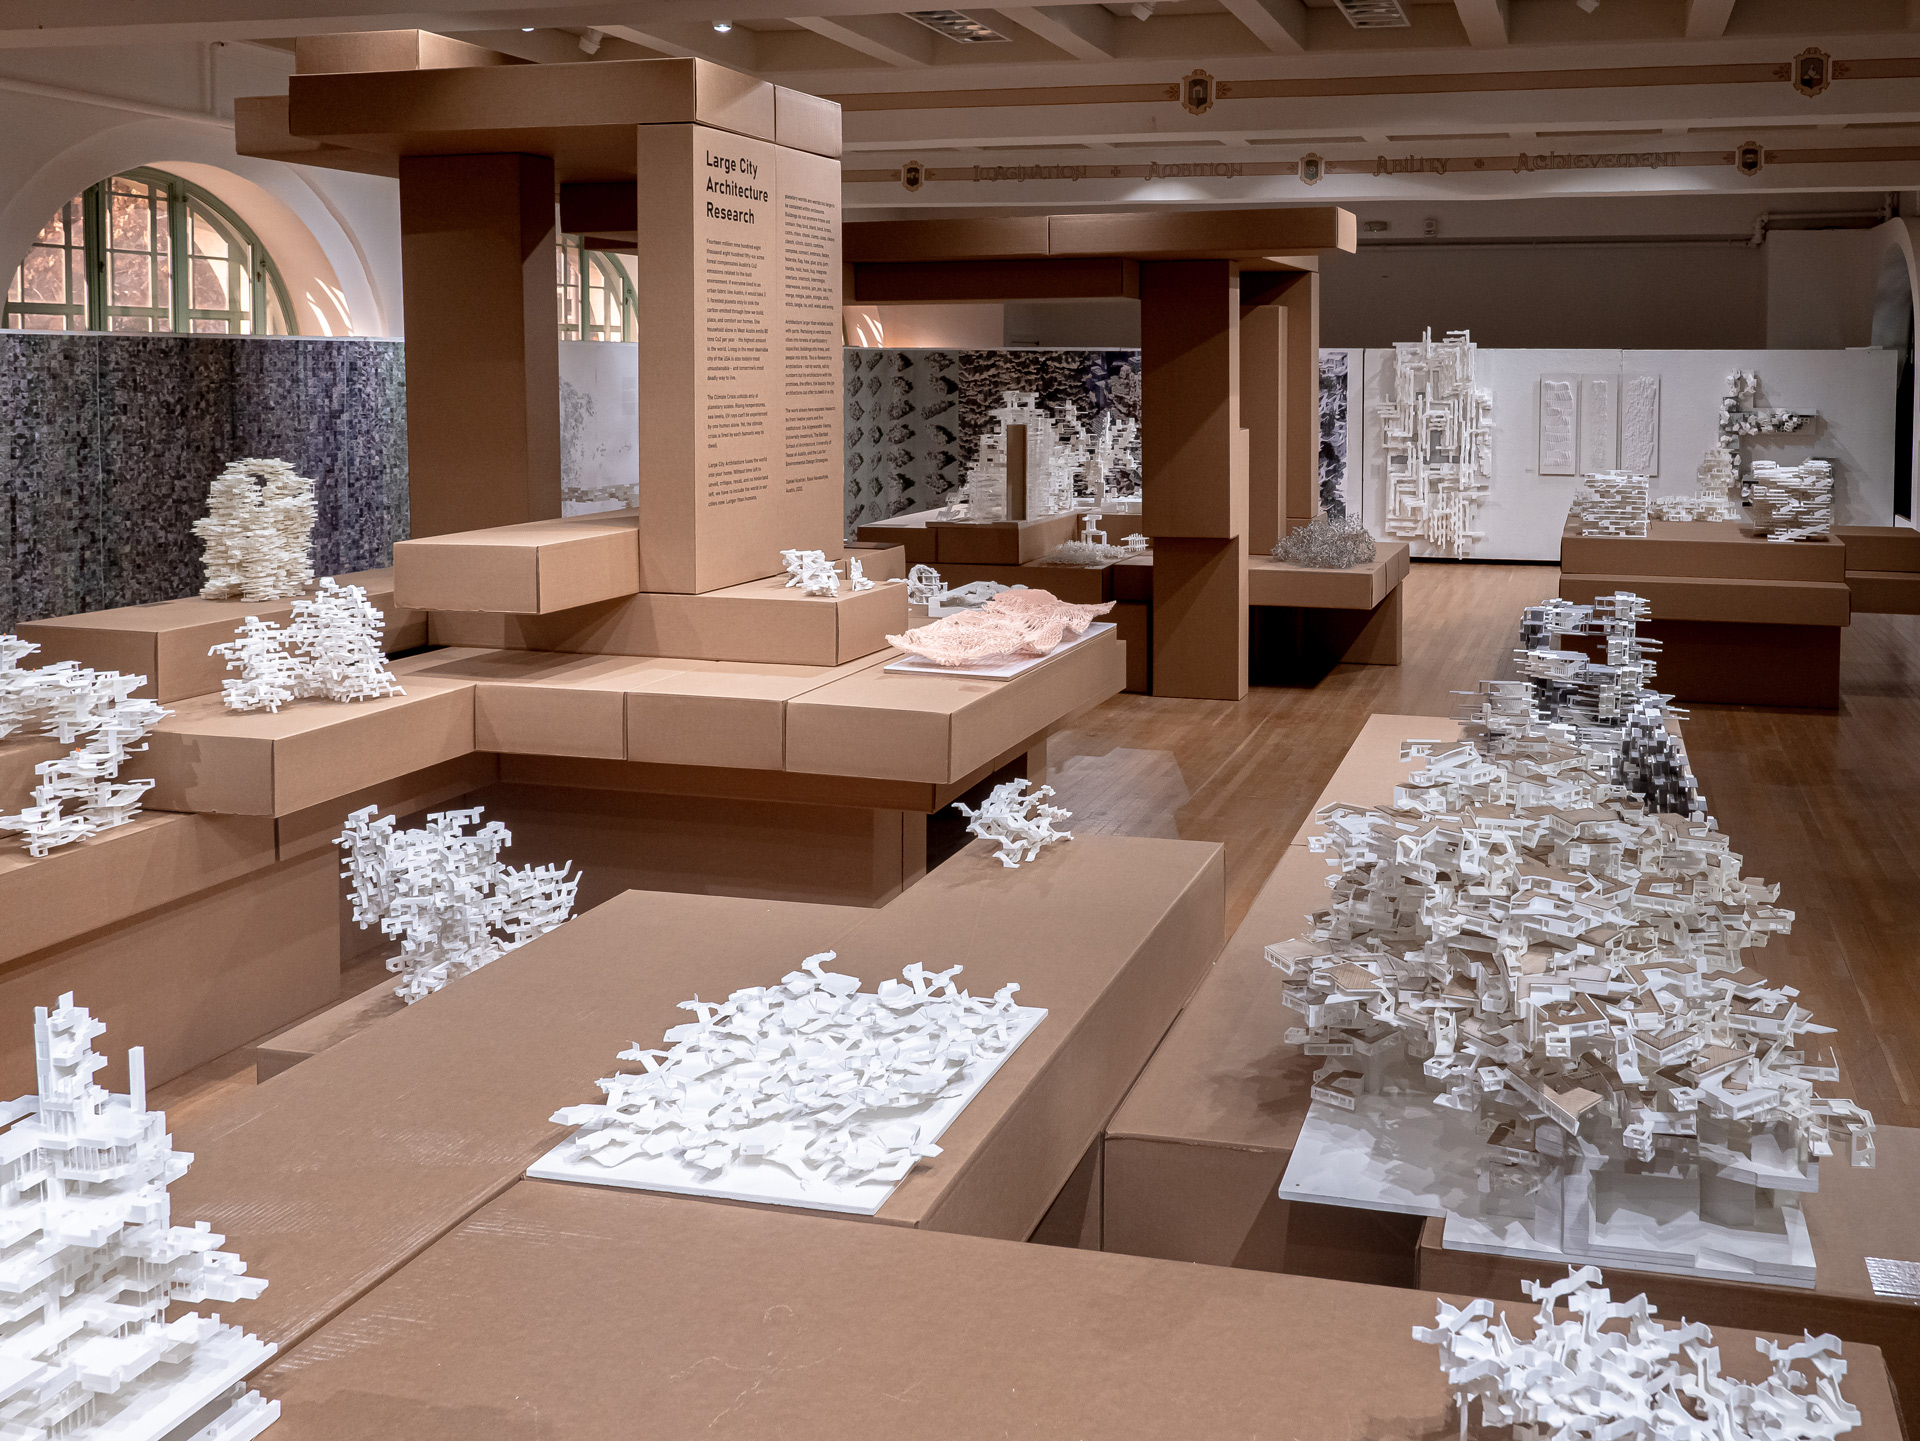 Large City Architecture Research Exhibition - Lab for Environmental Design  Strategies